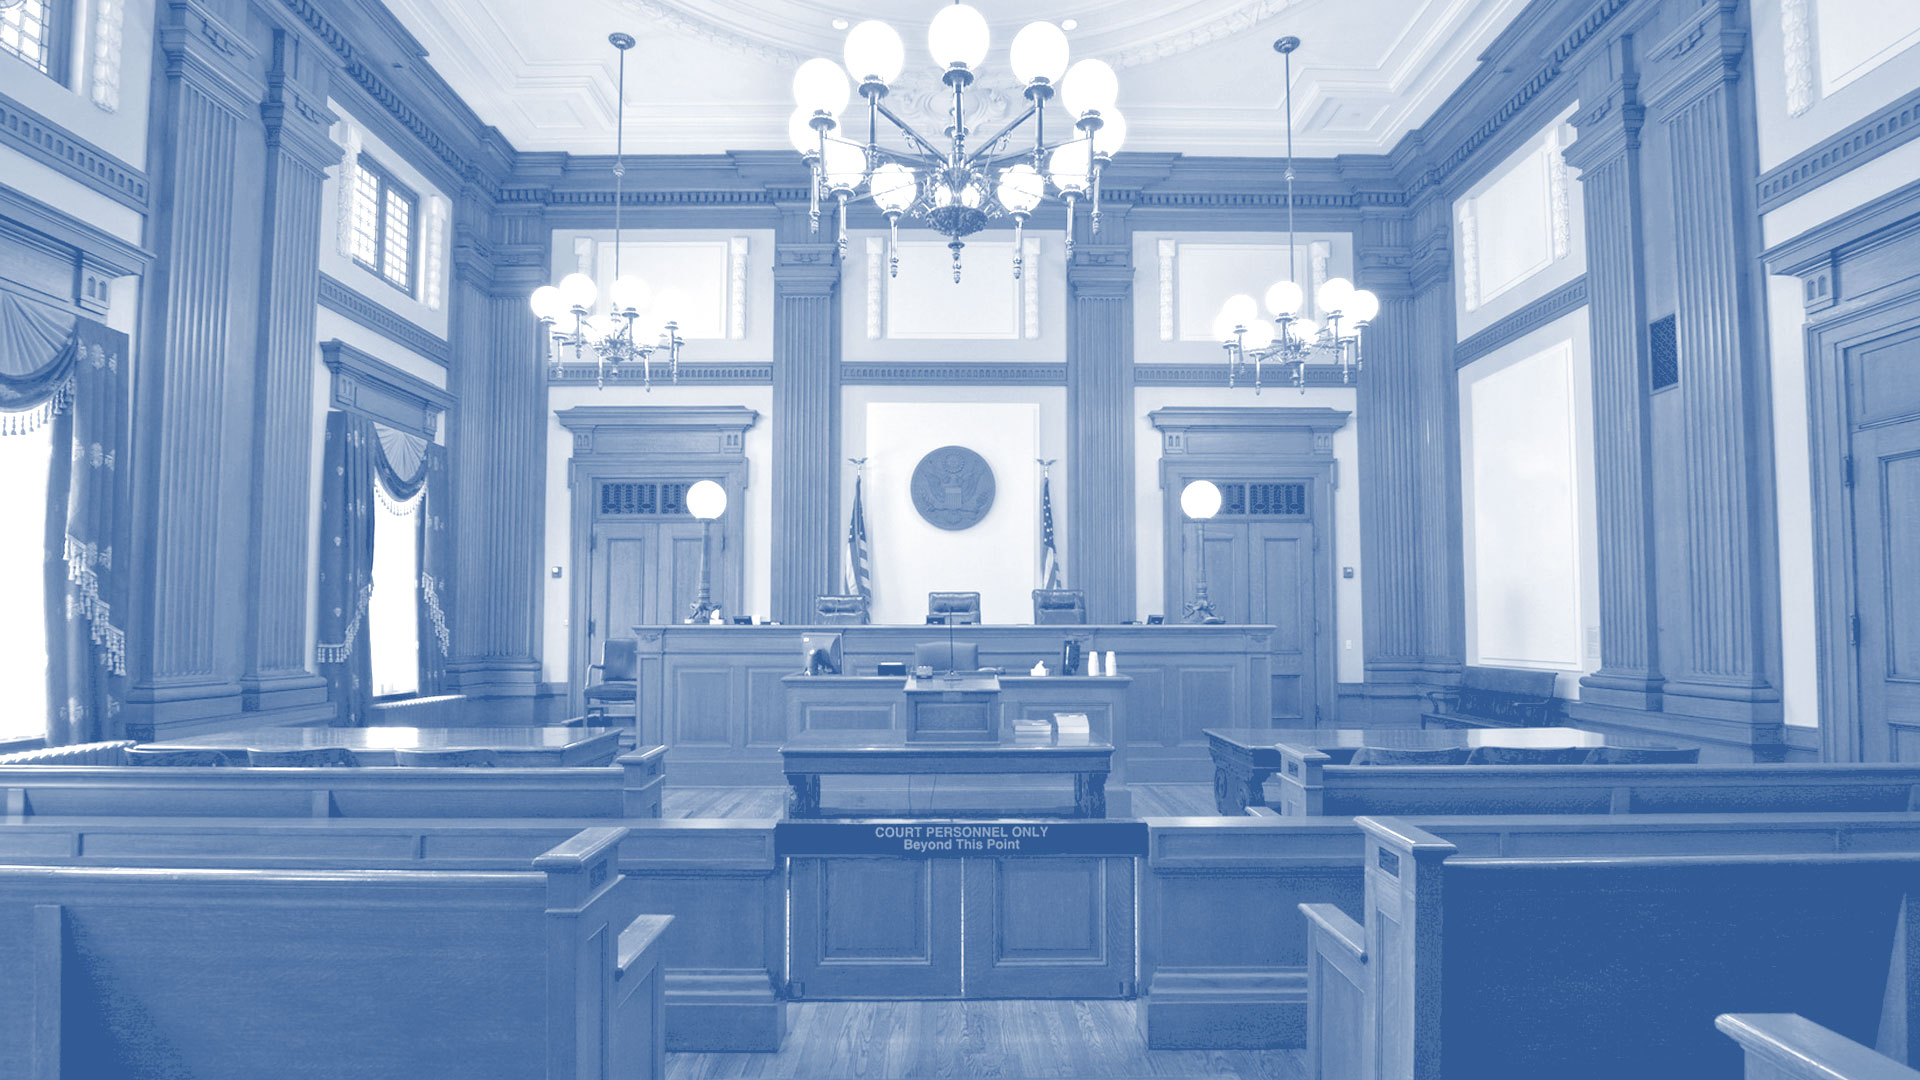 Involved in a dispute? Call a New Orleans civil litigation attorney today at (504) 564-7342. The Mahone Firm is here to help.